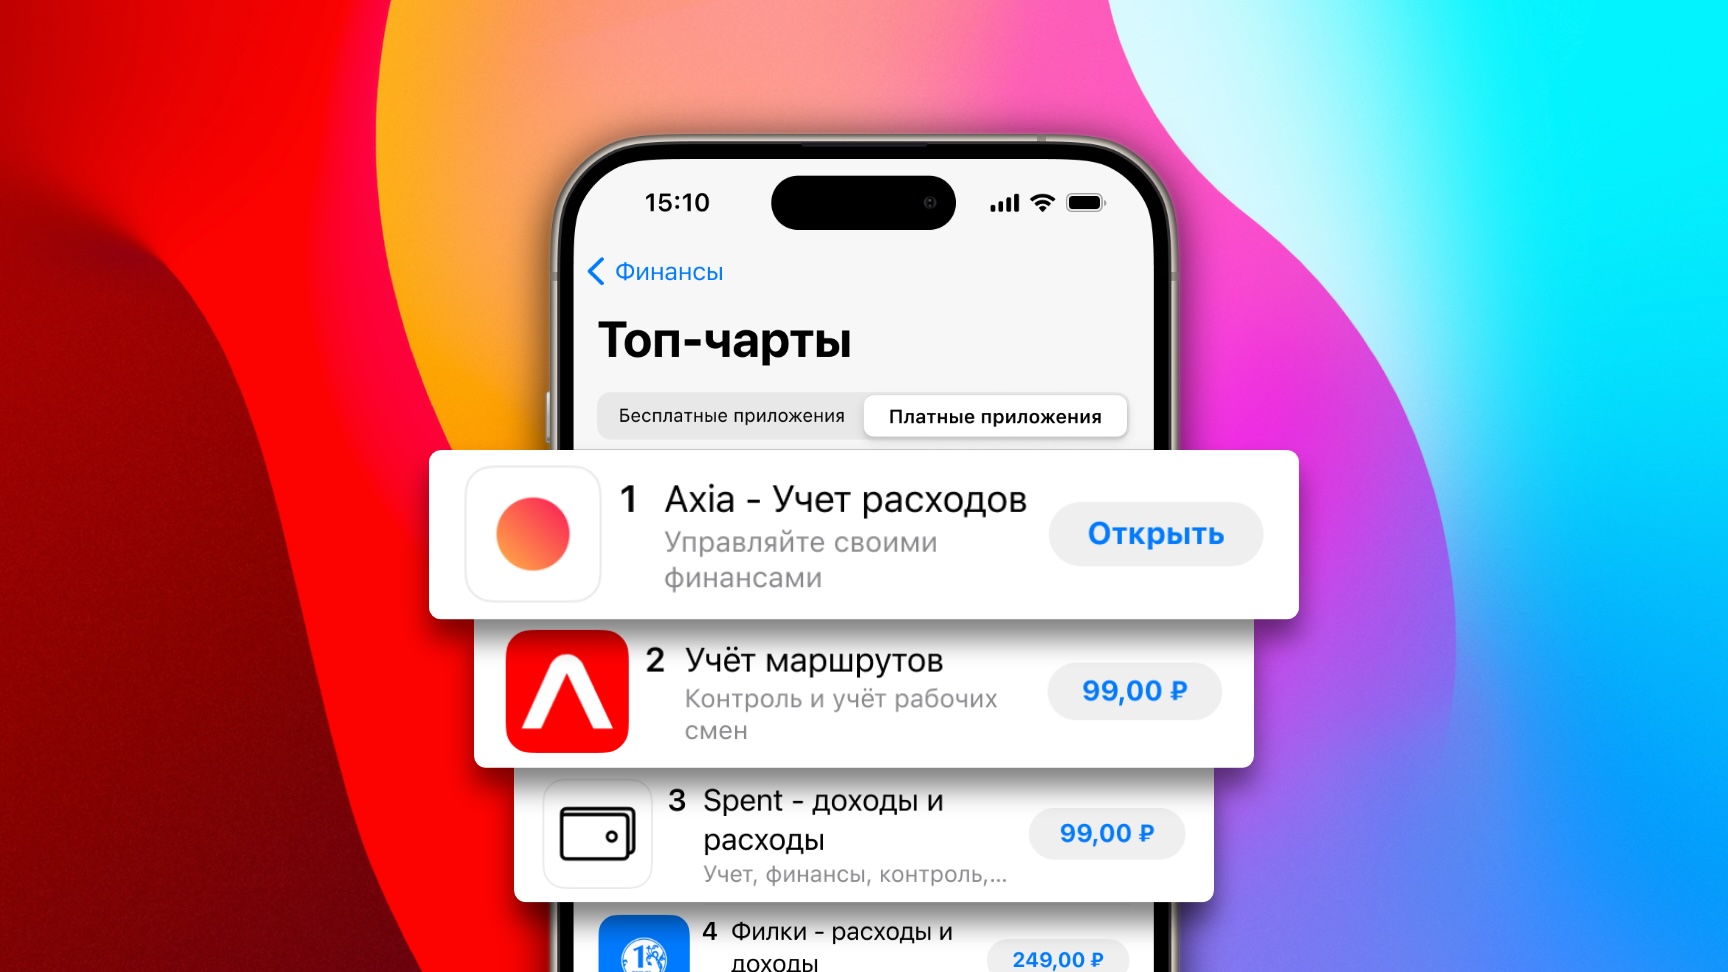 Axia #1 in the Russian App Store